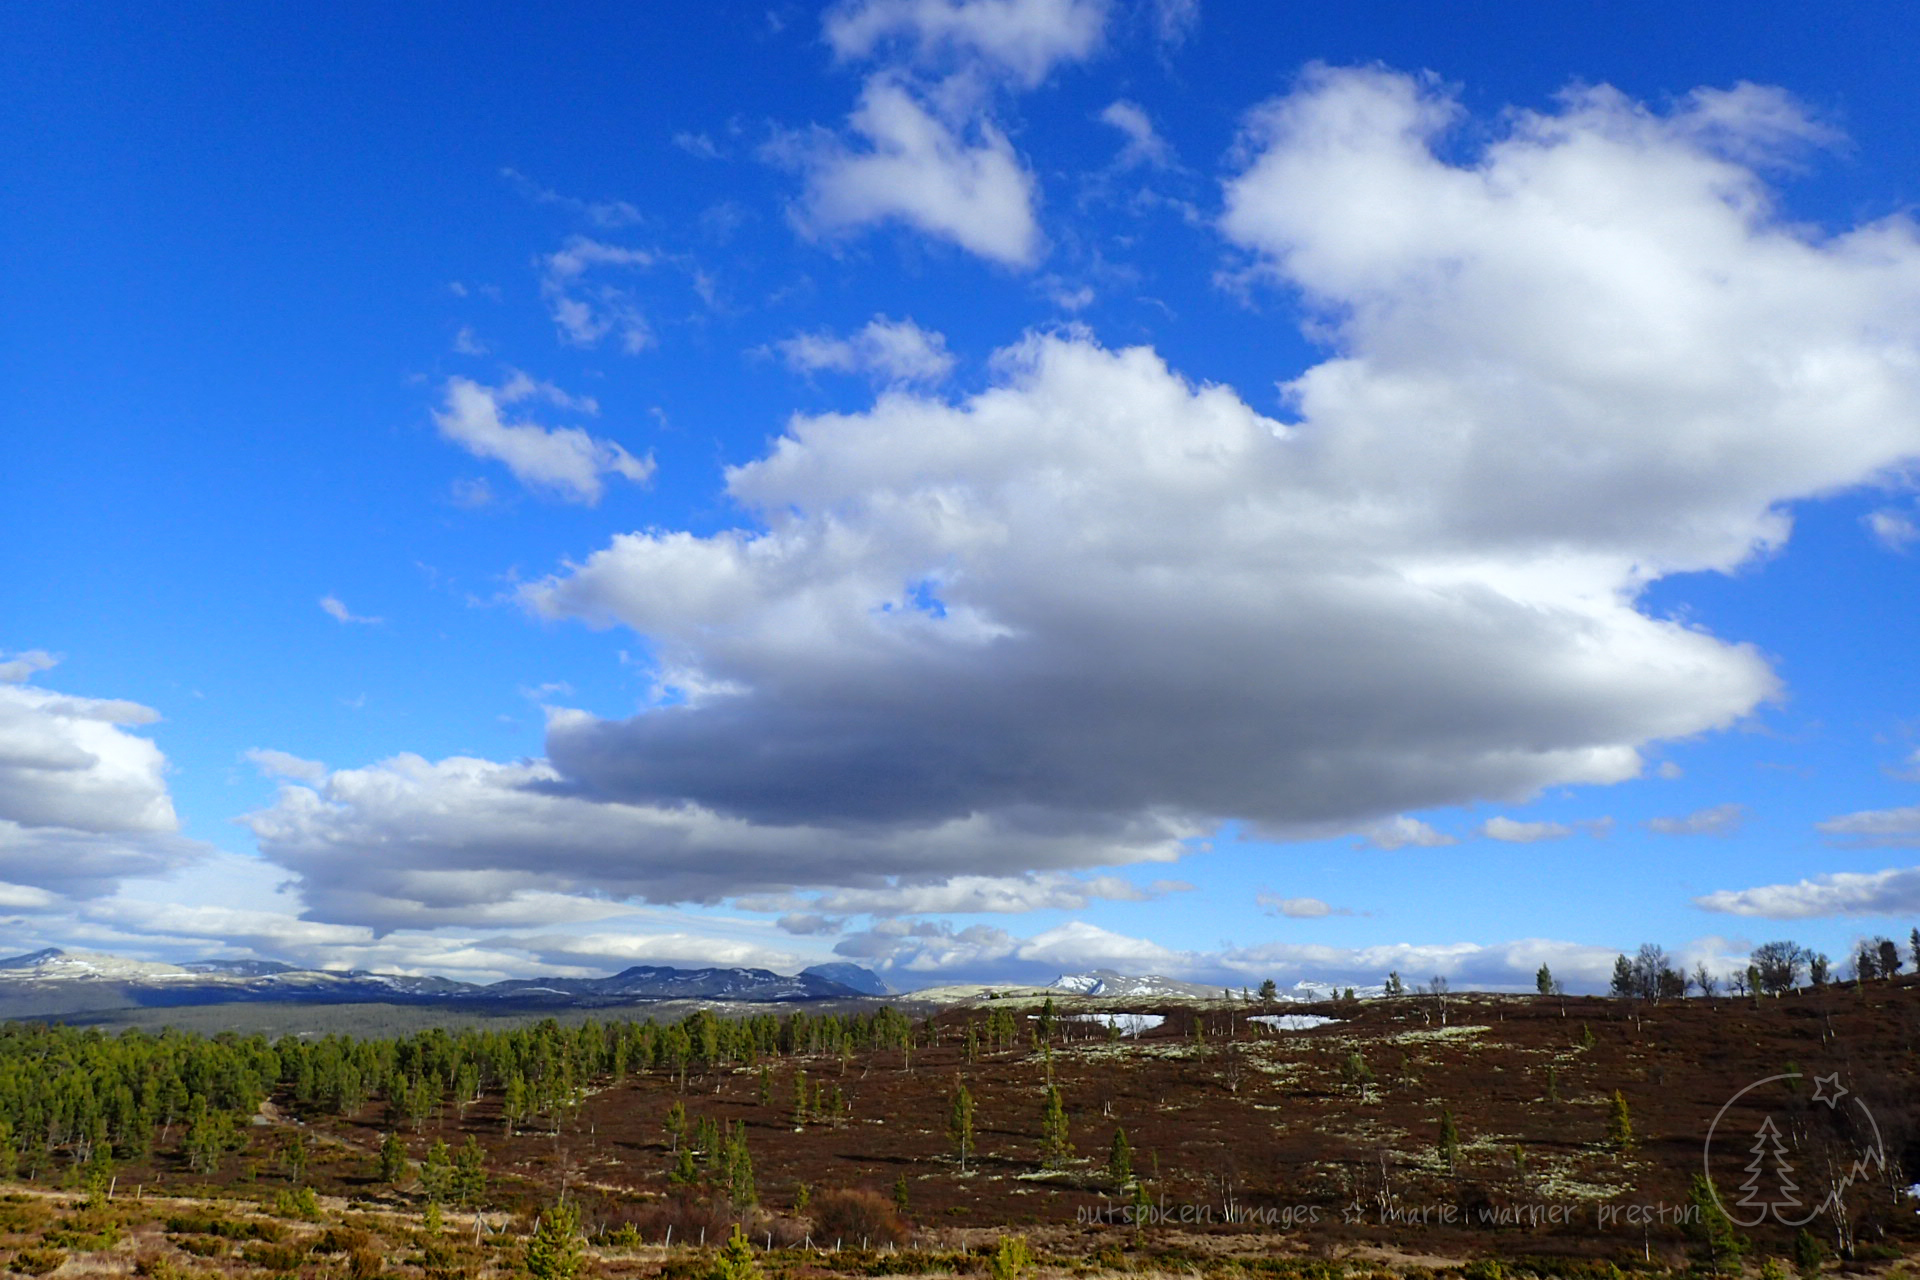 photograph: white clouds over blue mountains. trees on hill in foreground. Over the Mountain: Rondane, Norway. Photograph ©2022 Marie Preston